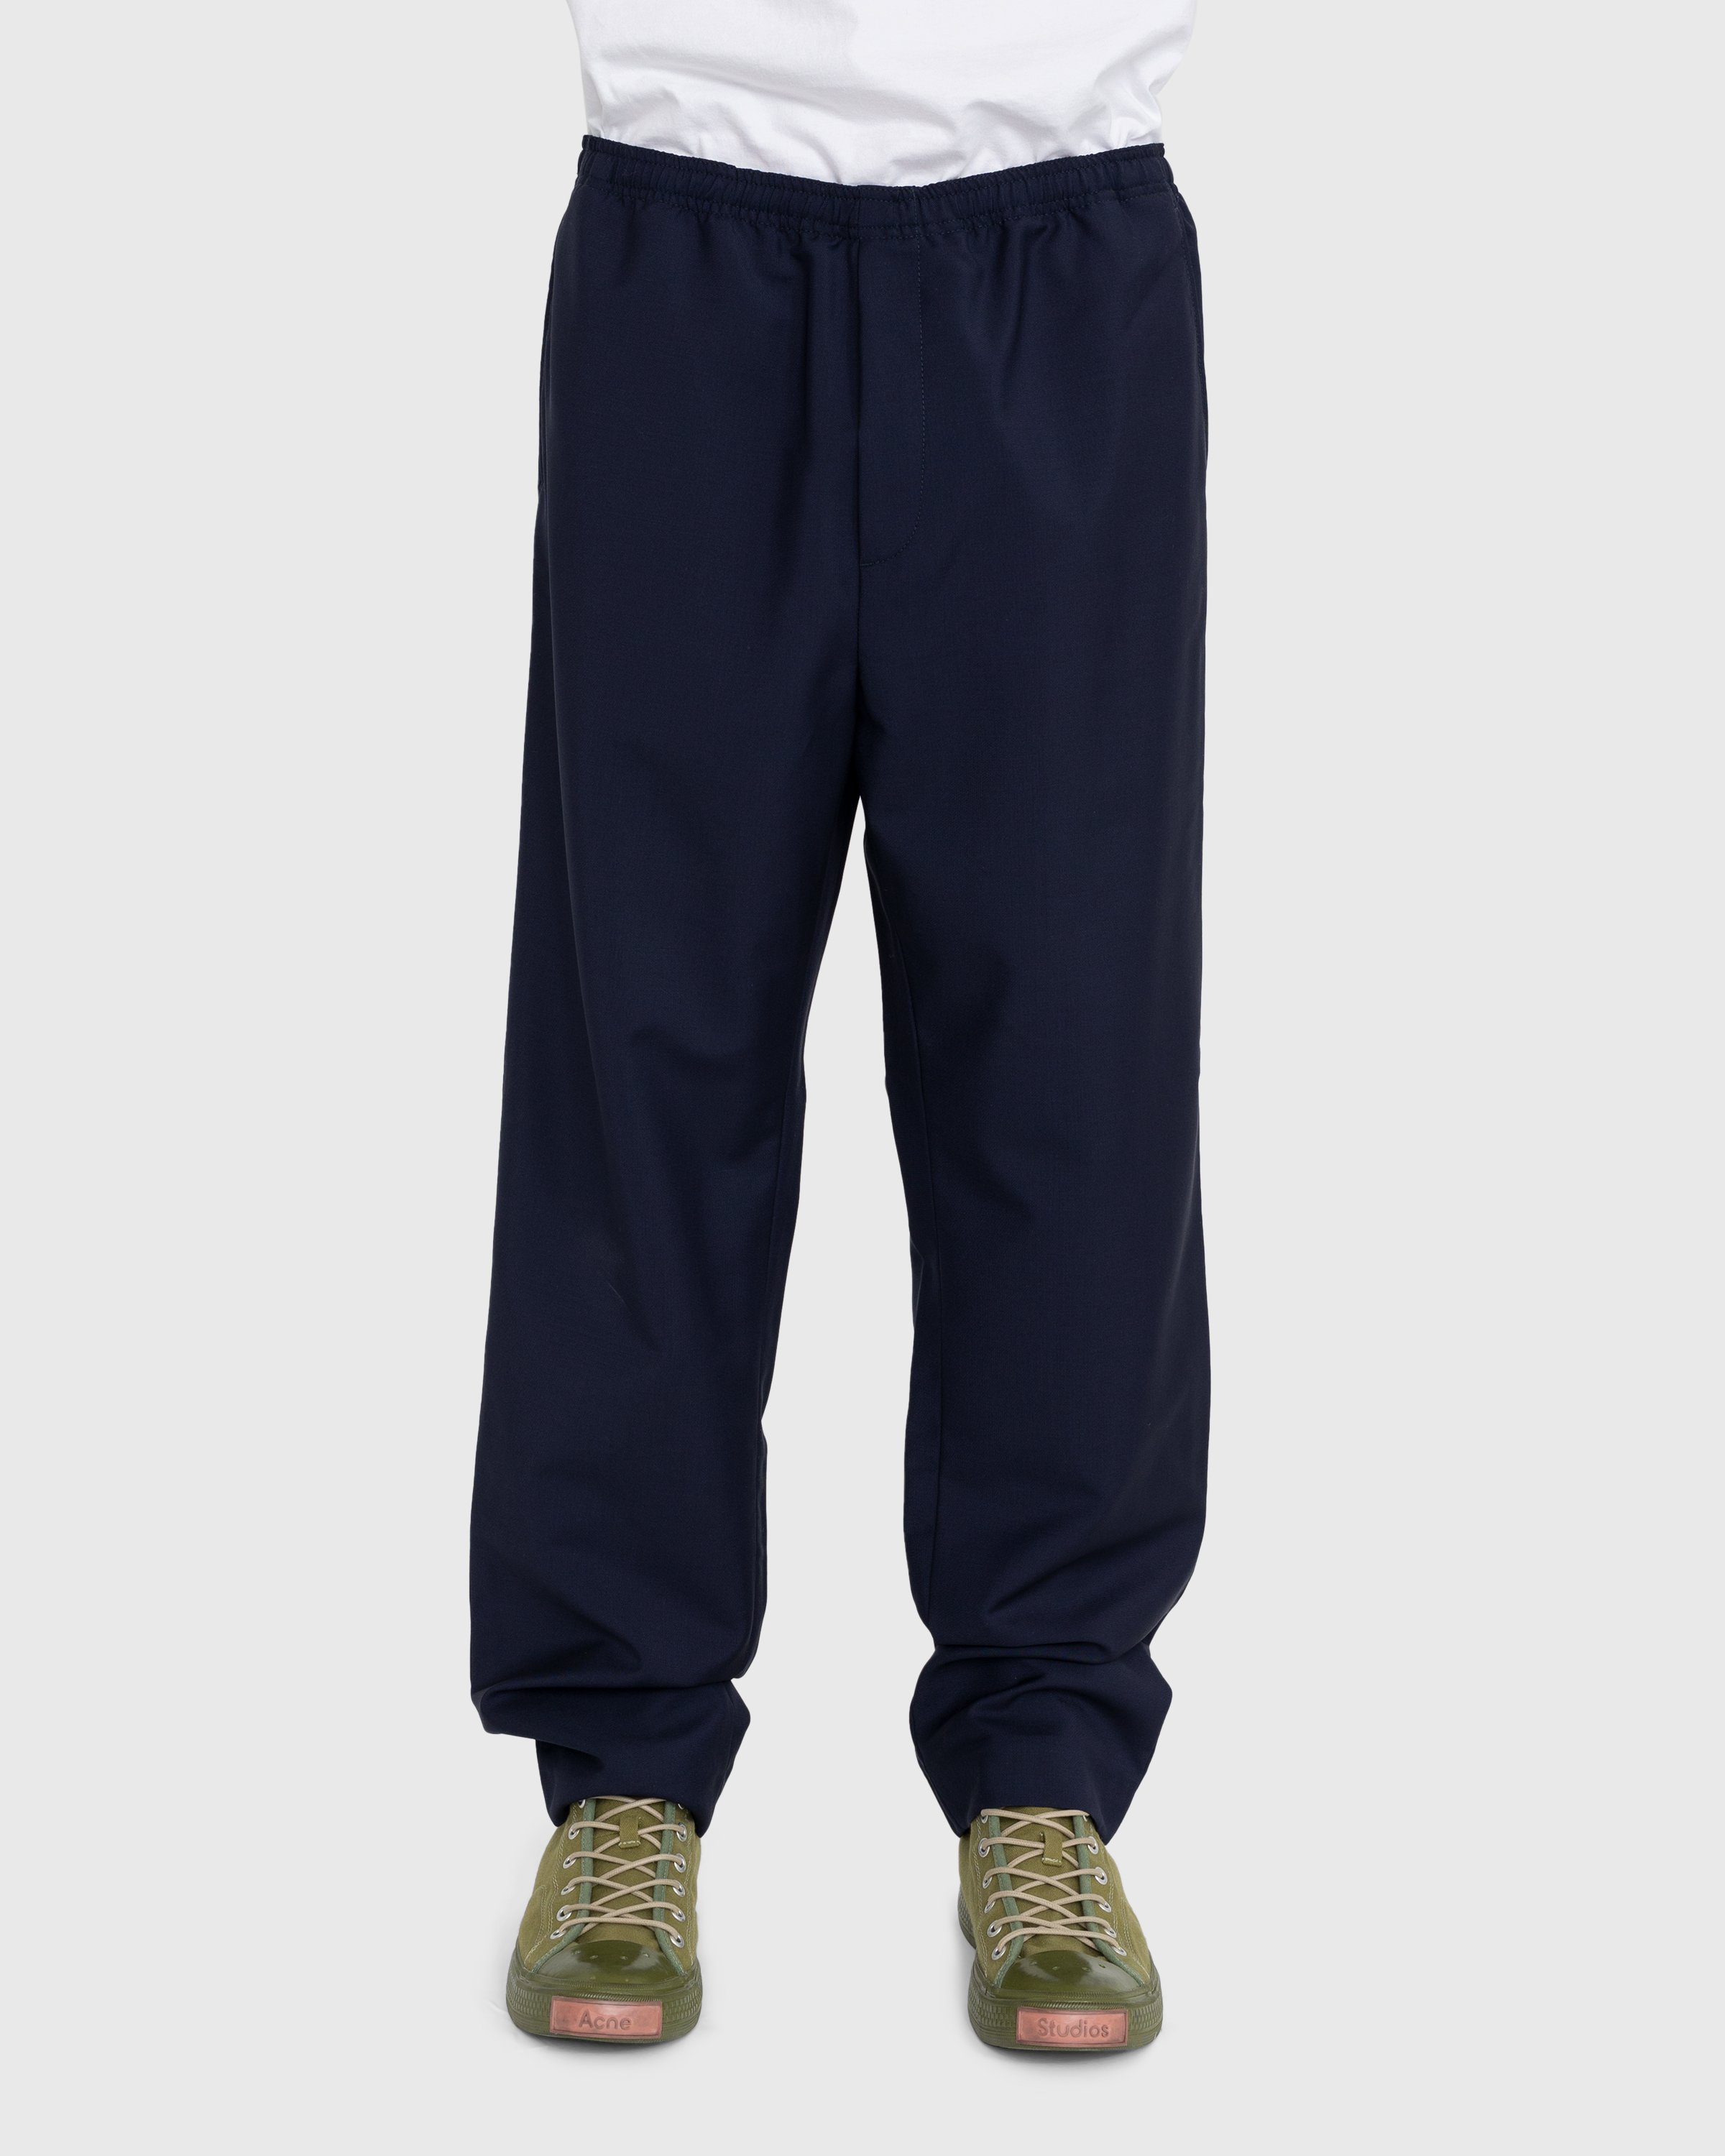 Acne Studios - Loose Fit Drawstring Trousers Blue - Clothing - Grey - Image 2